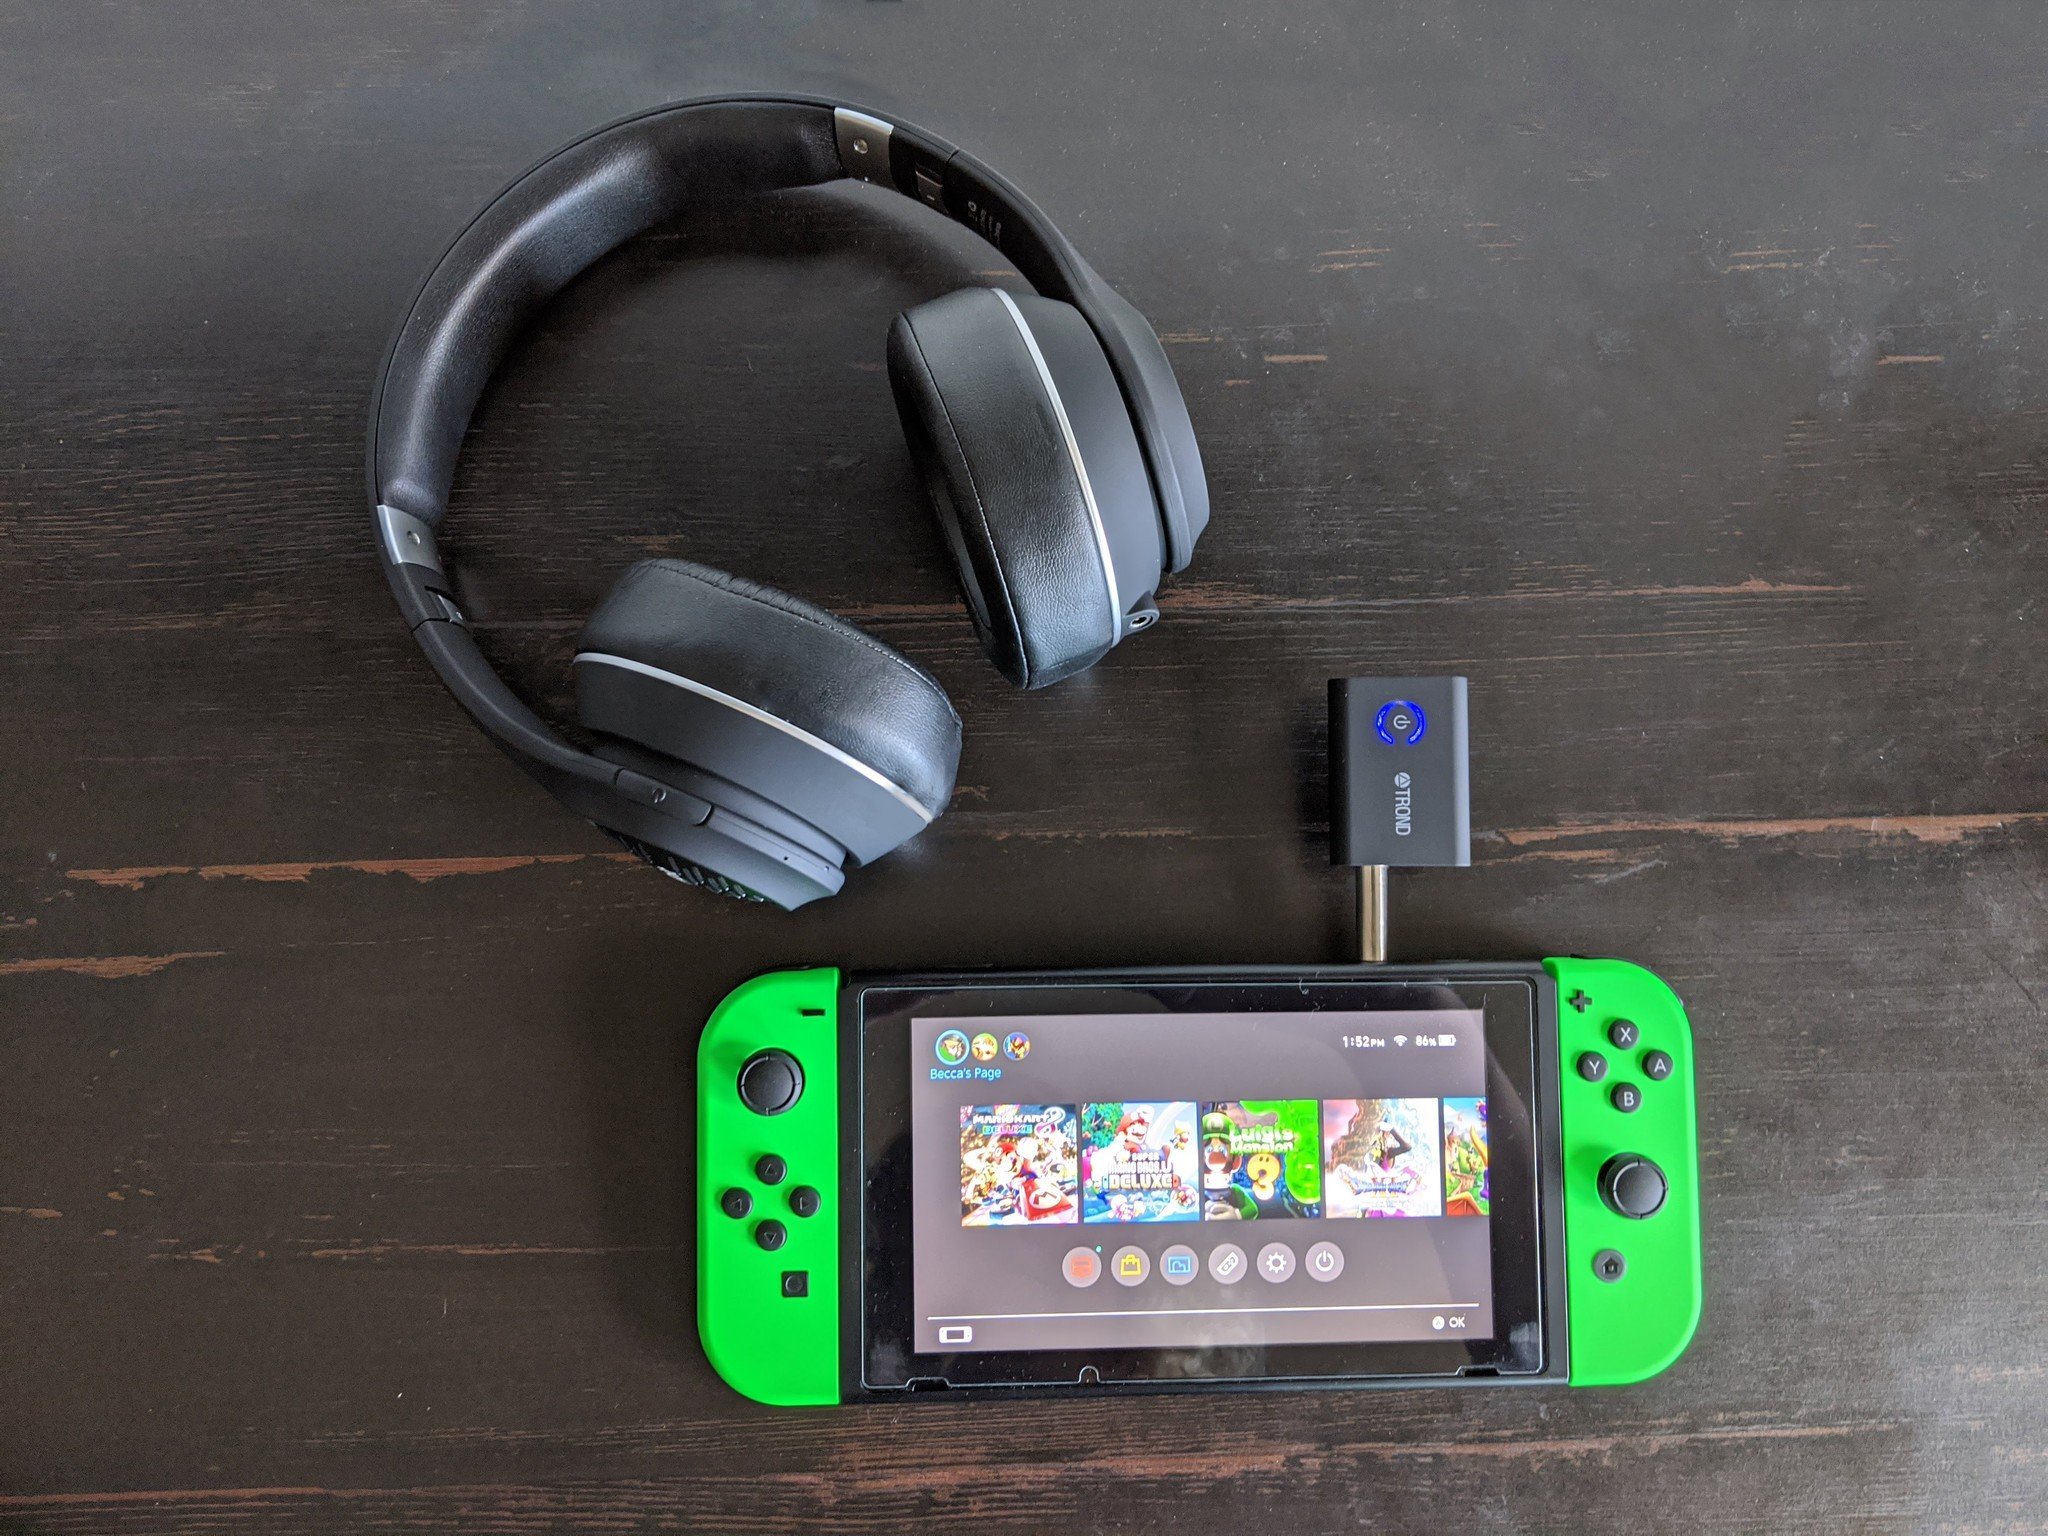 How to use Bluetooth headphones with a Nintendo Switch via the headphone jack: place your headphones and the adapter near each other and allow them to pair, it's successful when the transmitter's blue LED remains constant